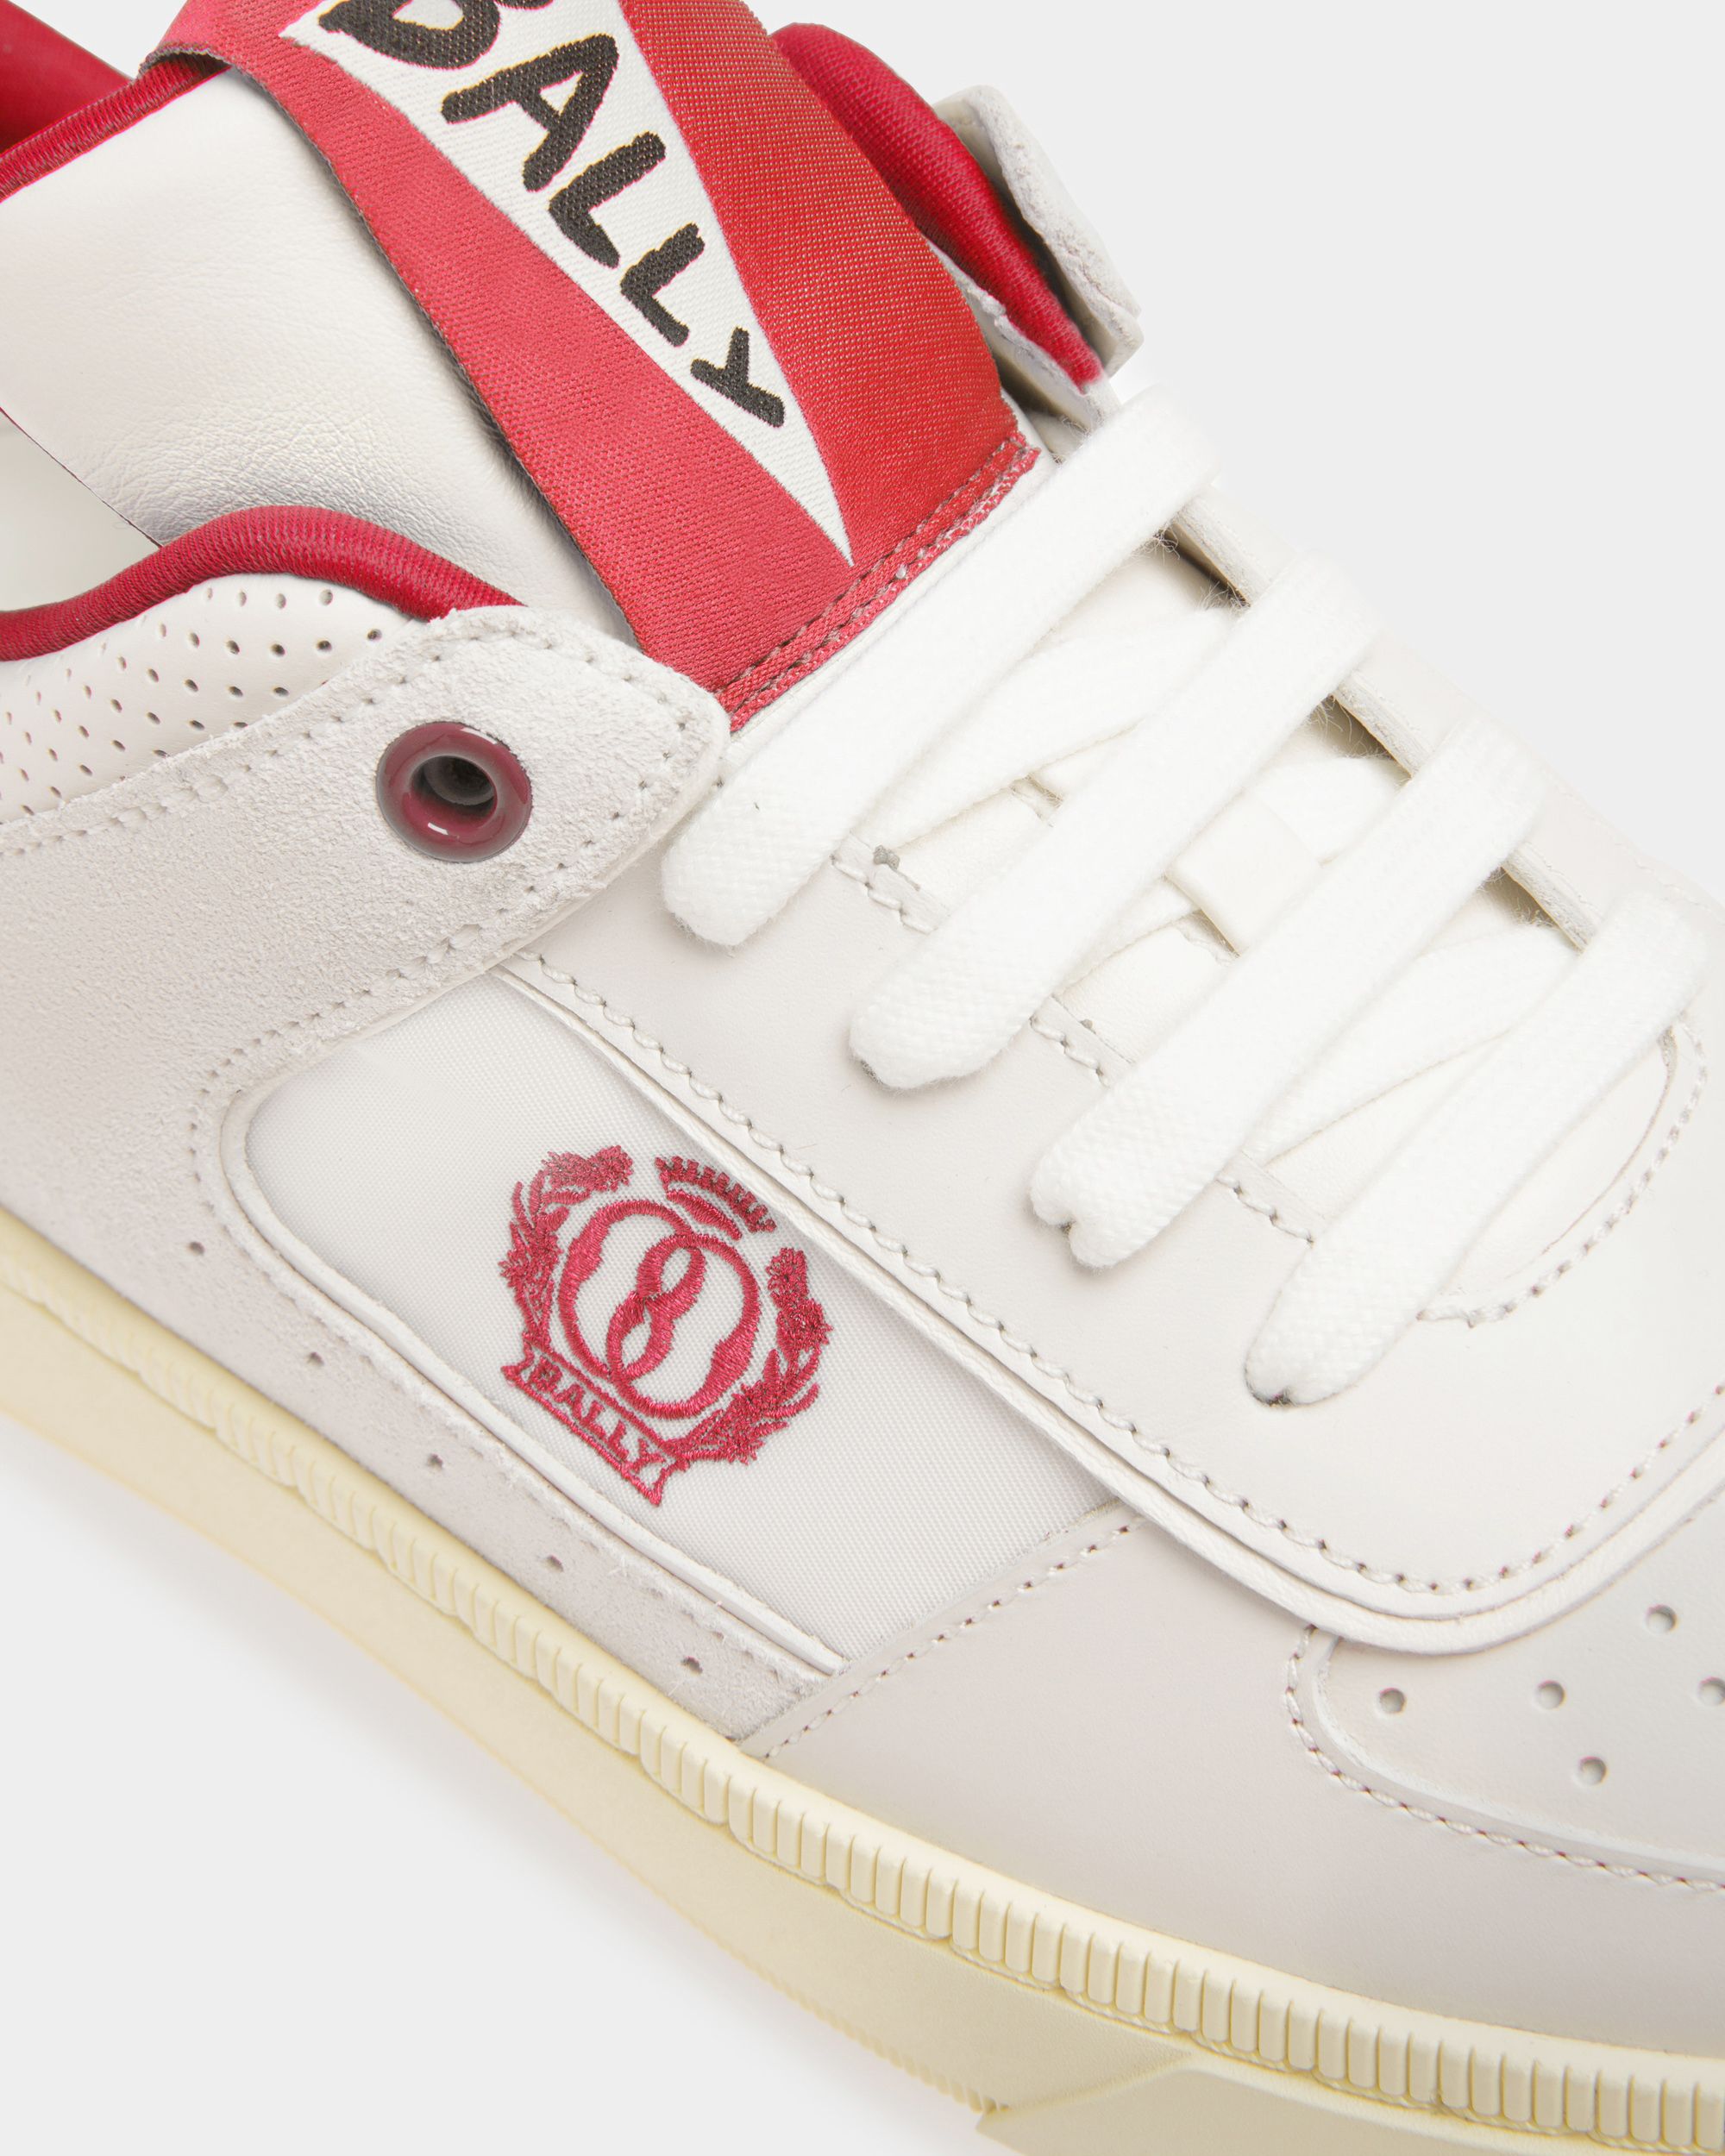 Riweira | Women's Sneakers | White And Red Leather | Bally | Still Life Detail